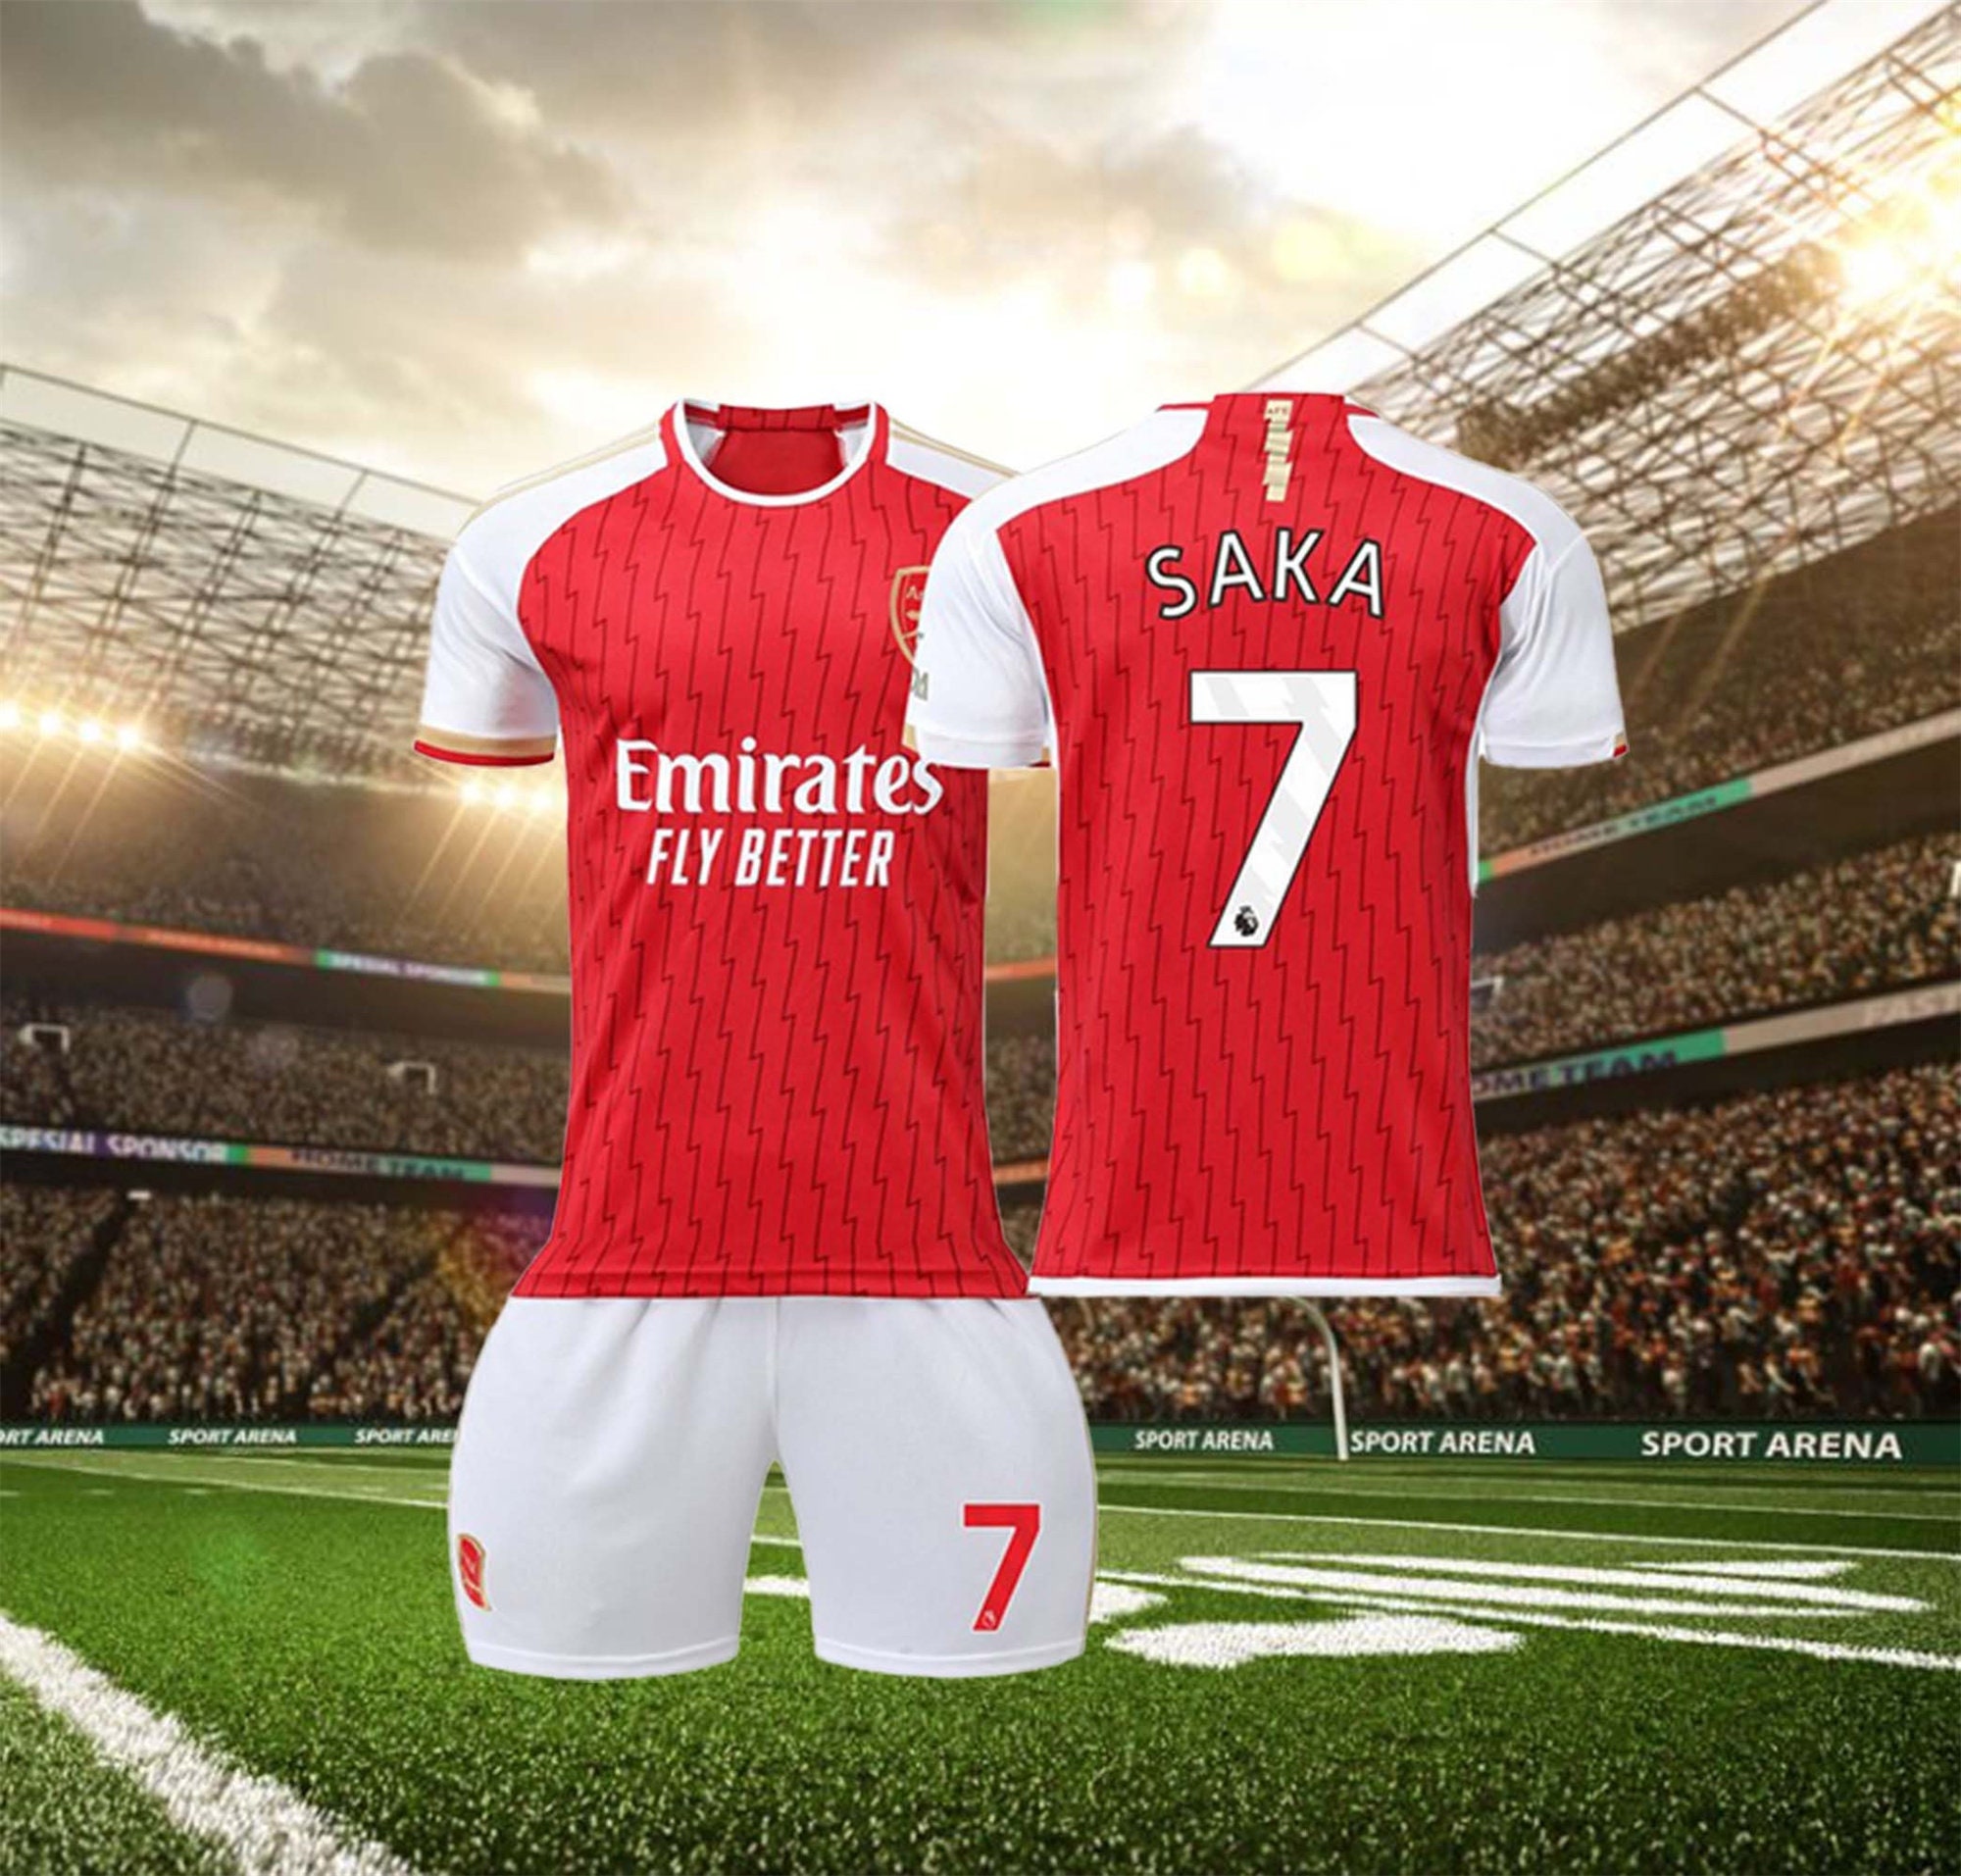 High-quality Fly Emirates Jersey